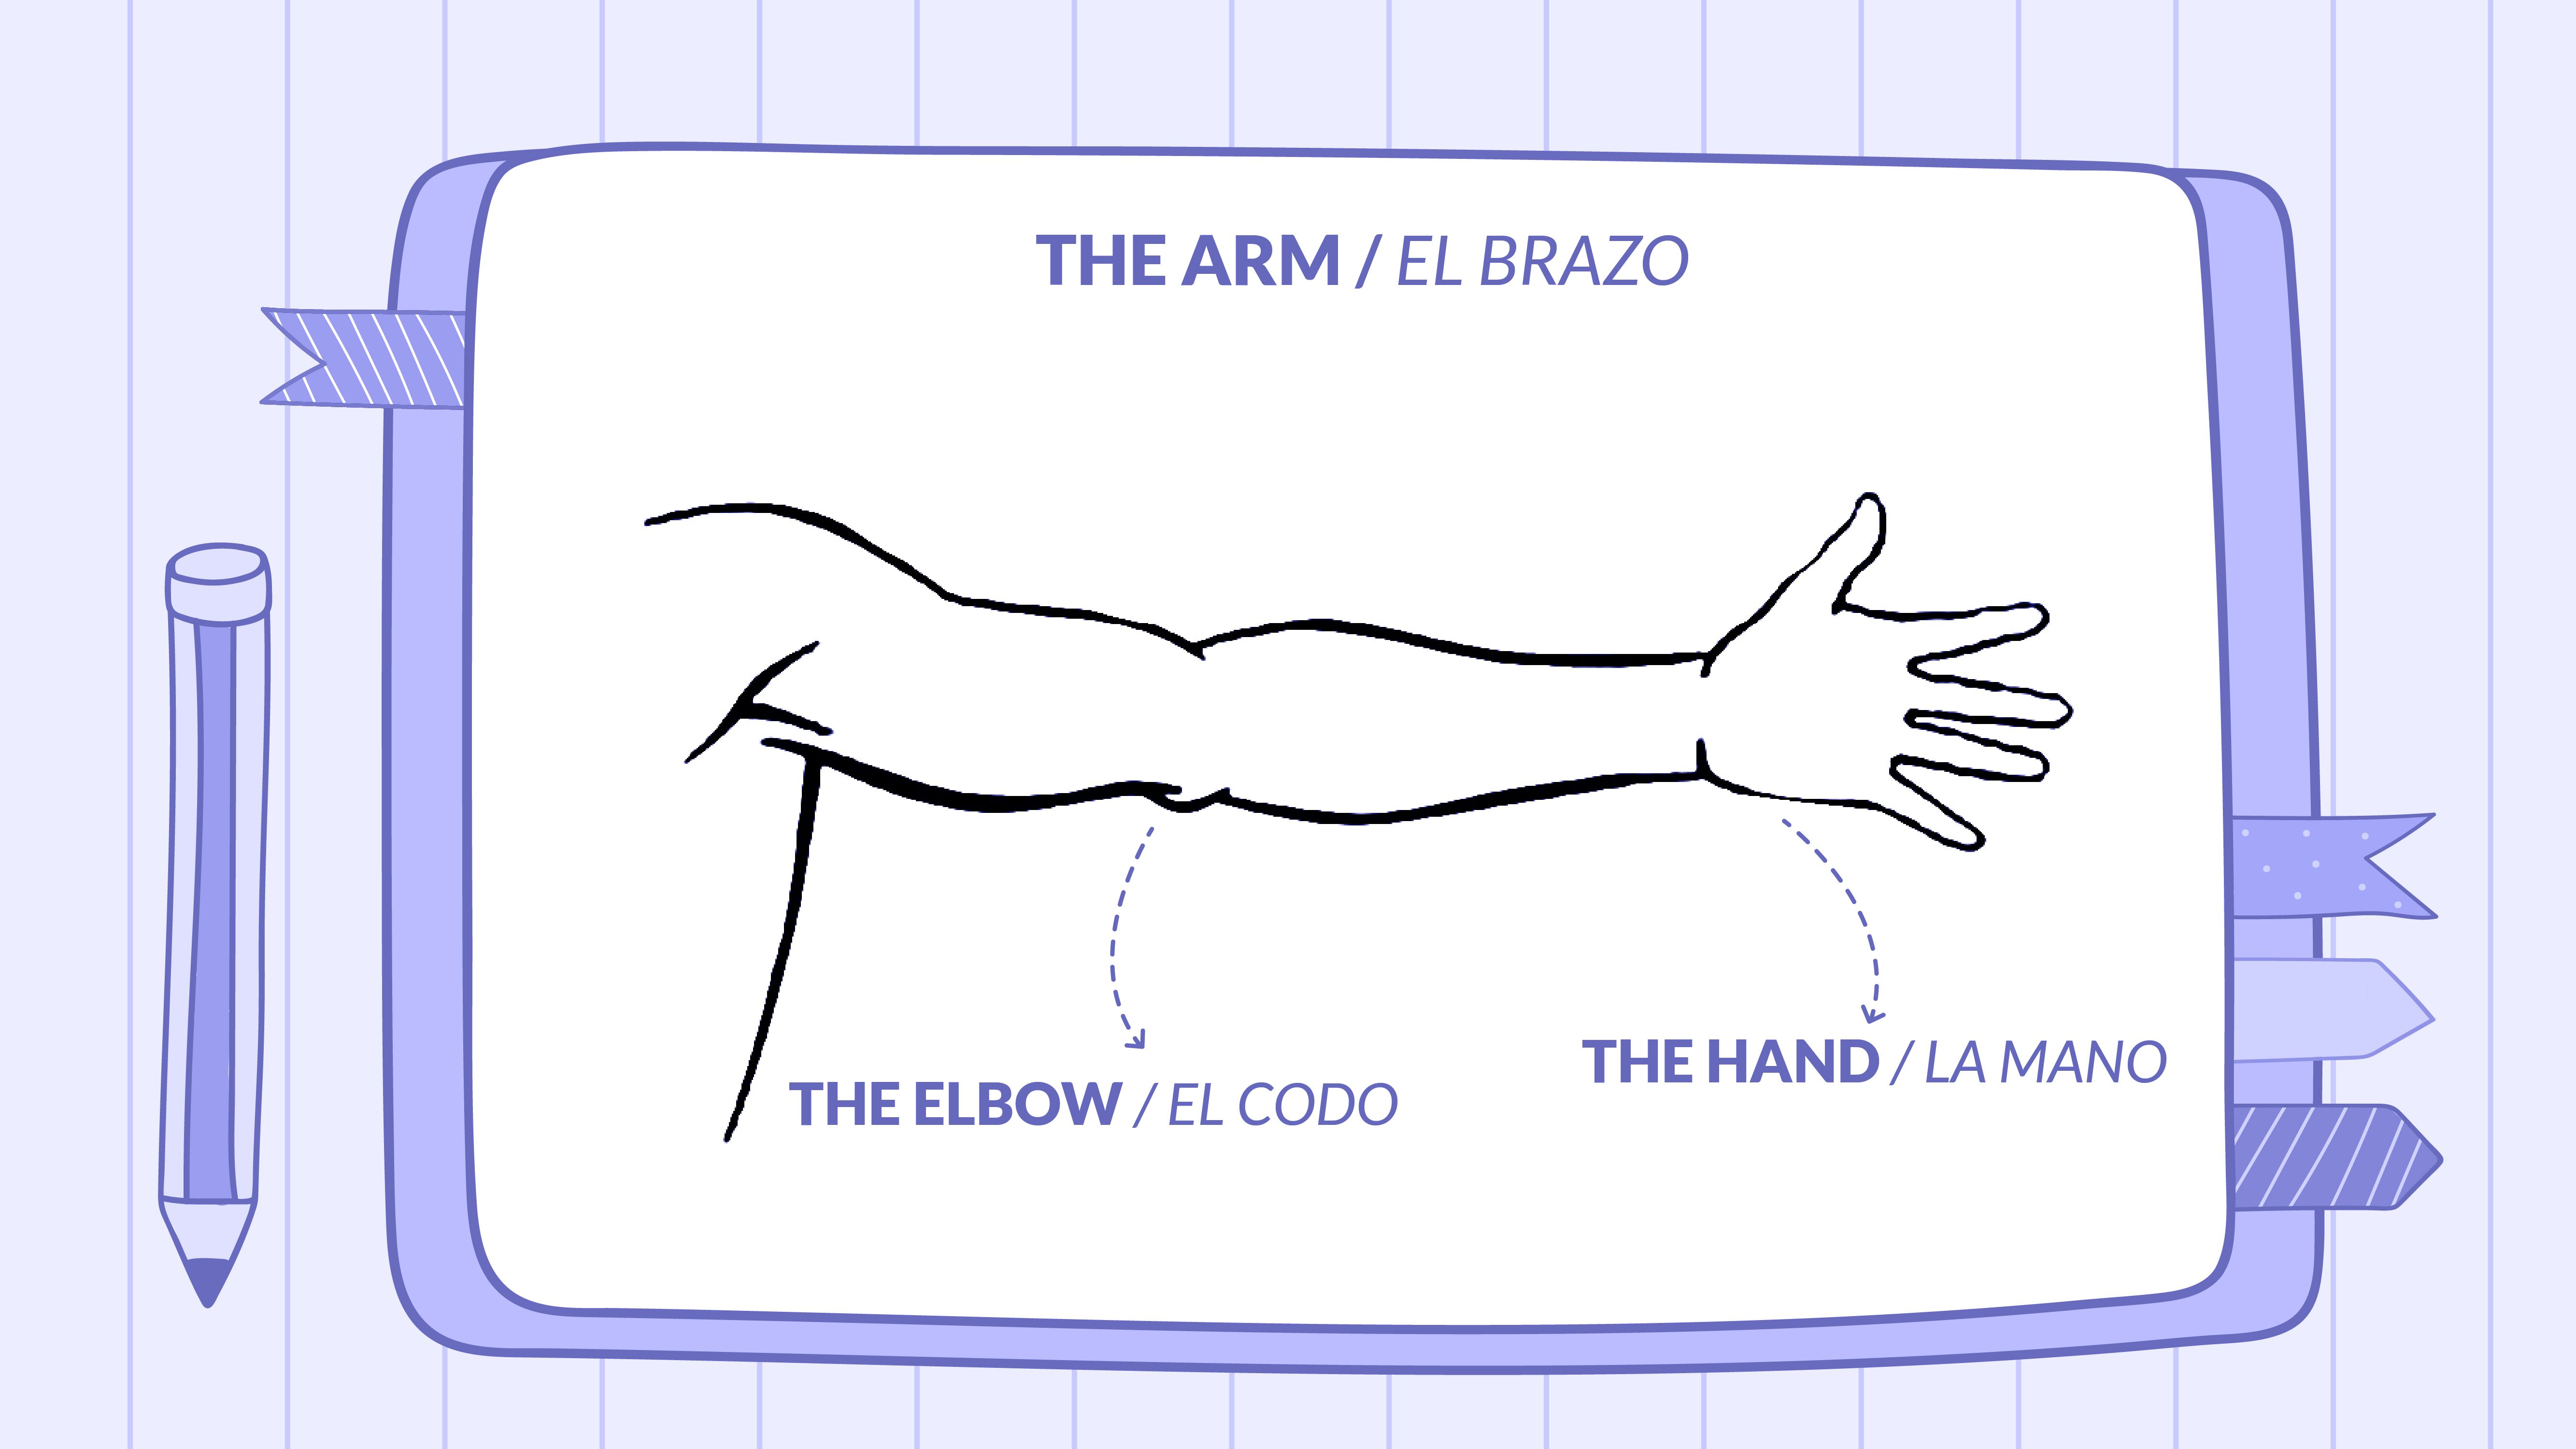 A drawing of a human upper body, with arrows pointing at the arm (el brazo), elbow (el codo), and hand (la mano).